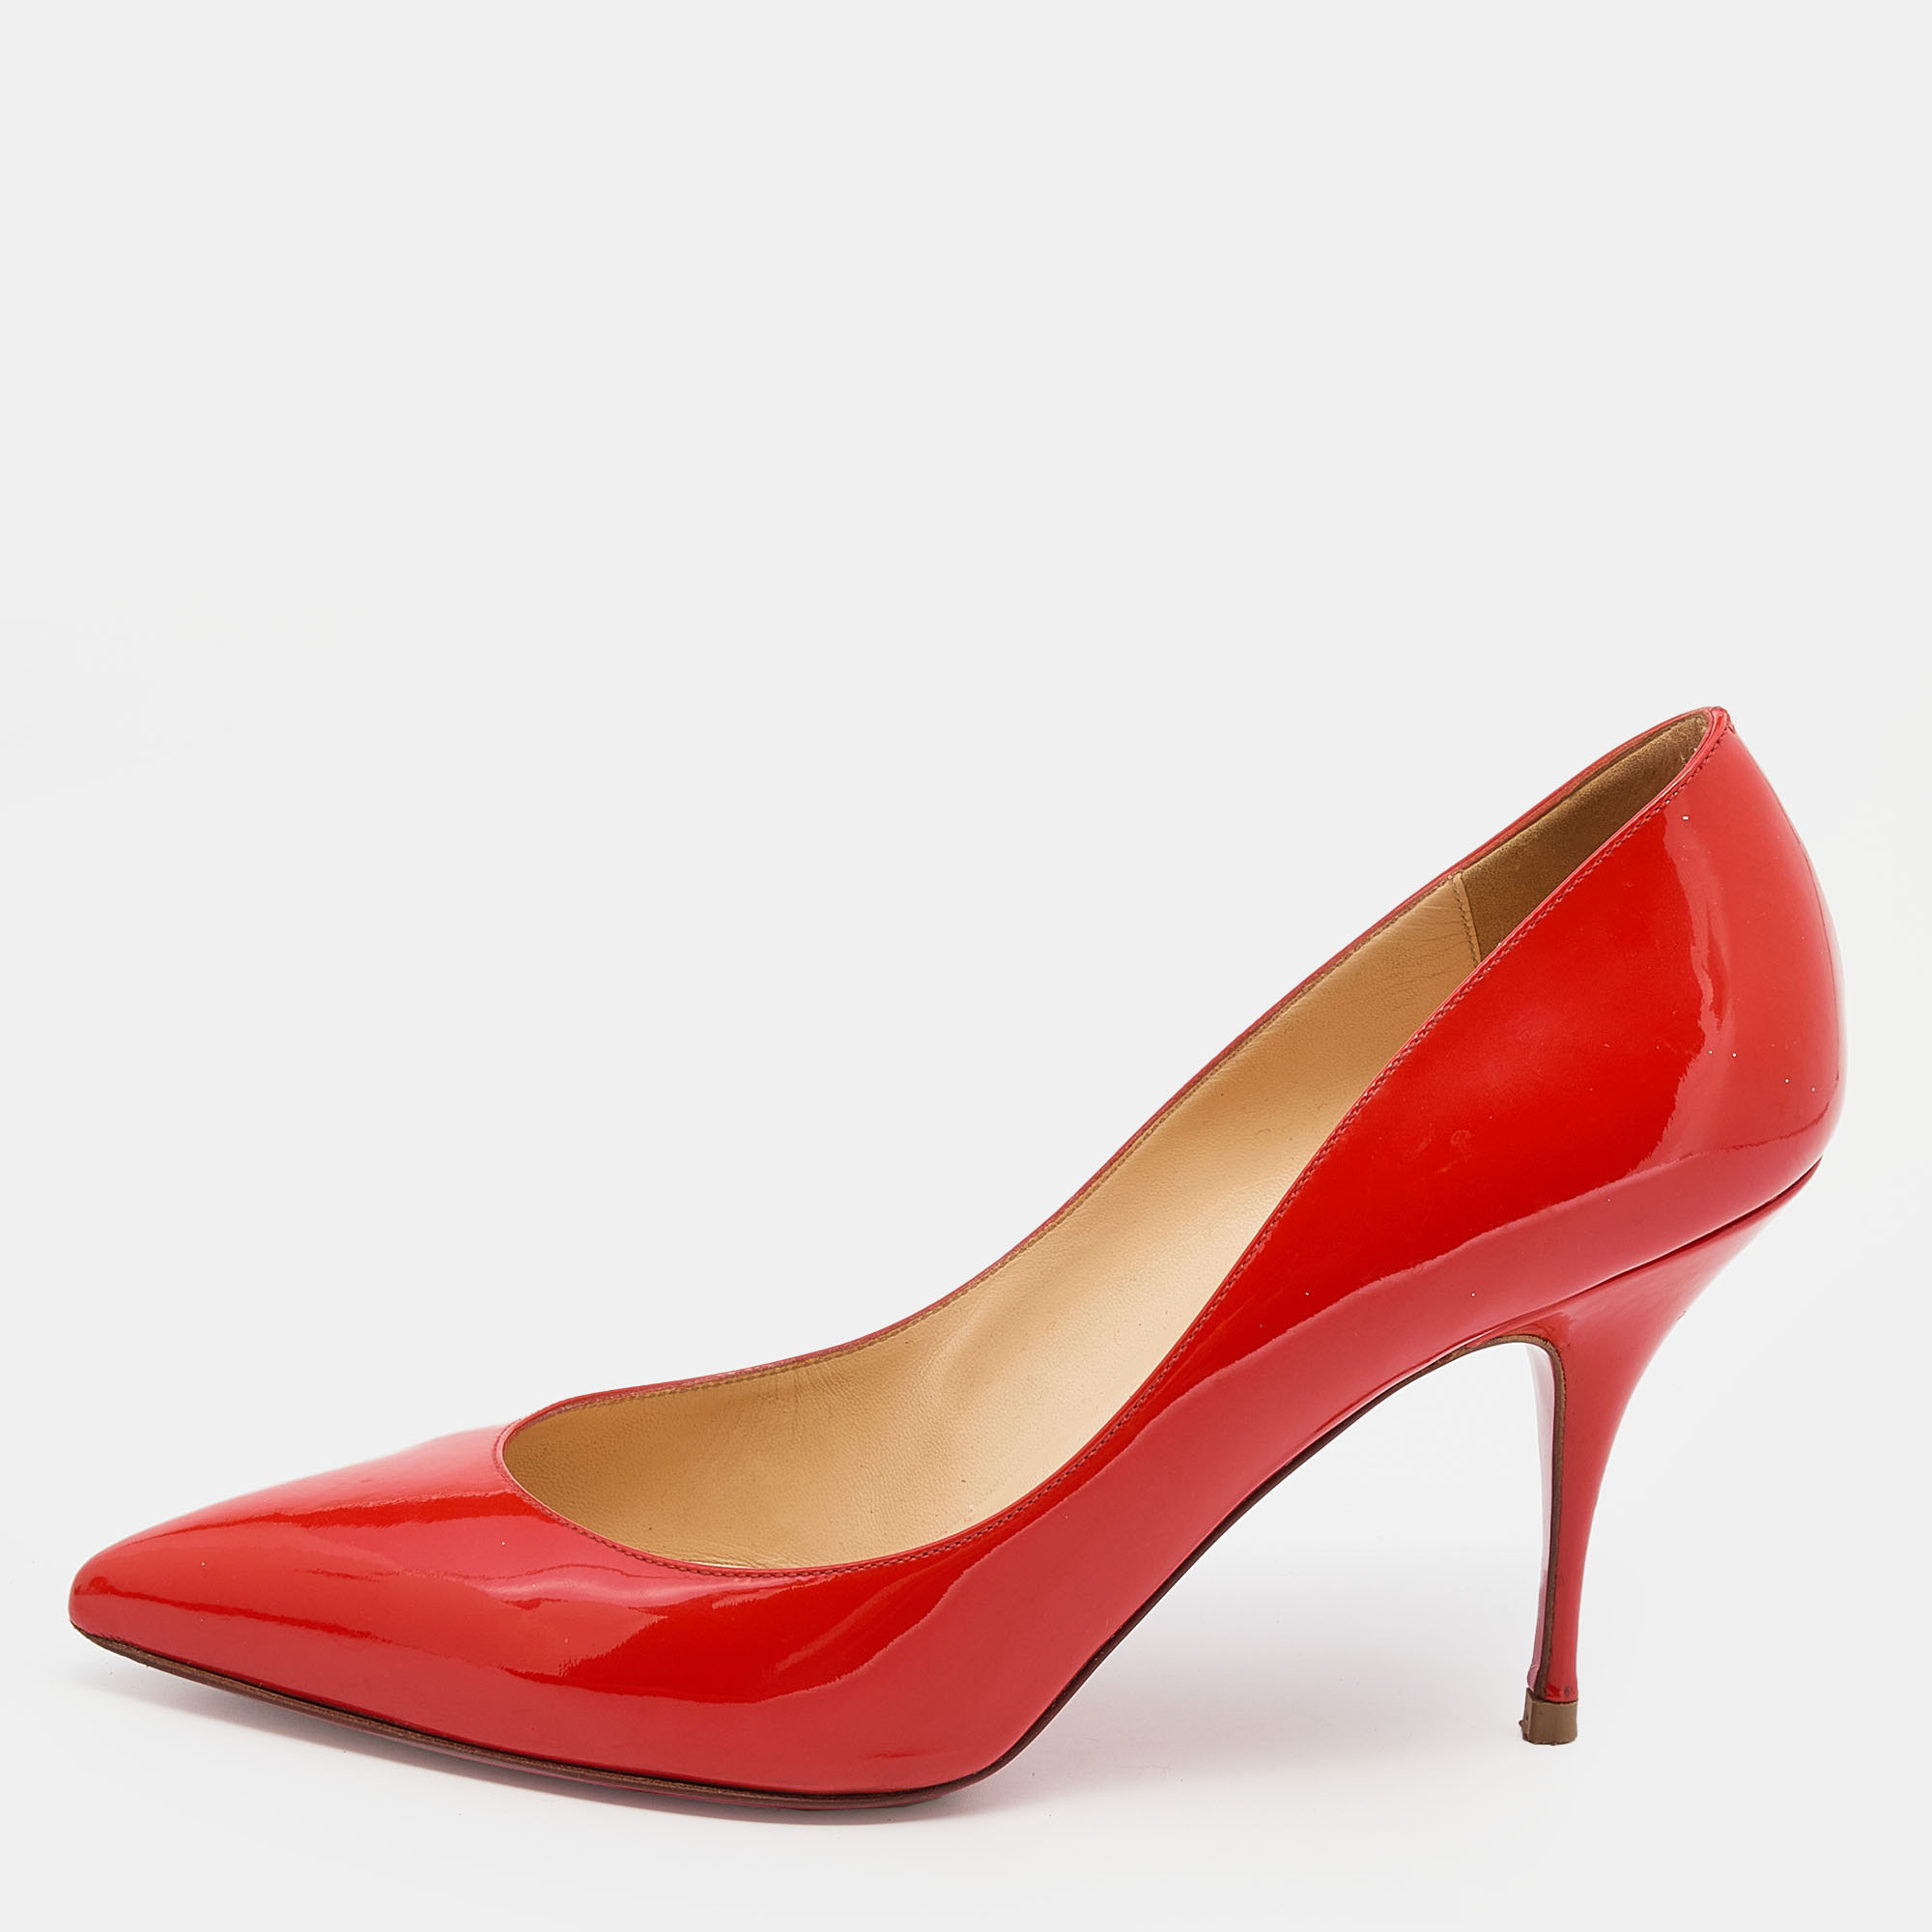 Christian Louboutin Orange Patent Leather Pointed Toe Pumps Size 39.5